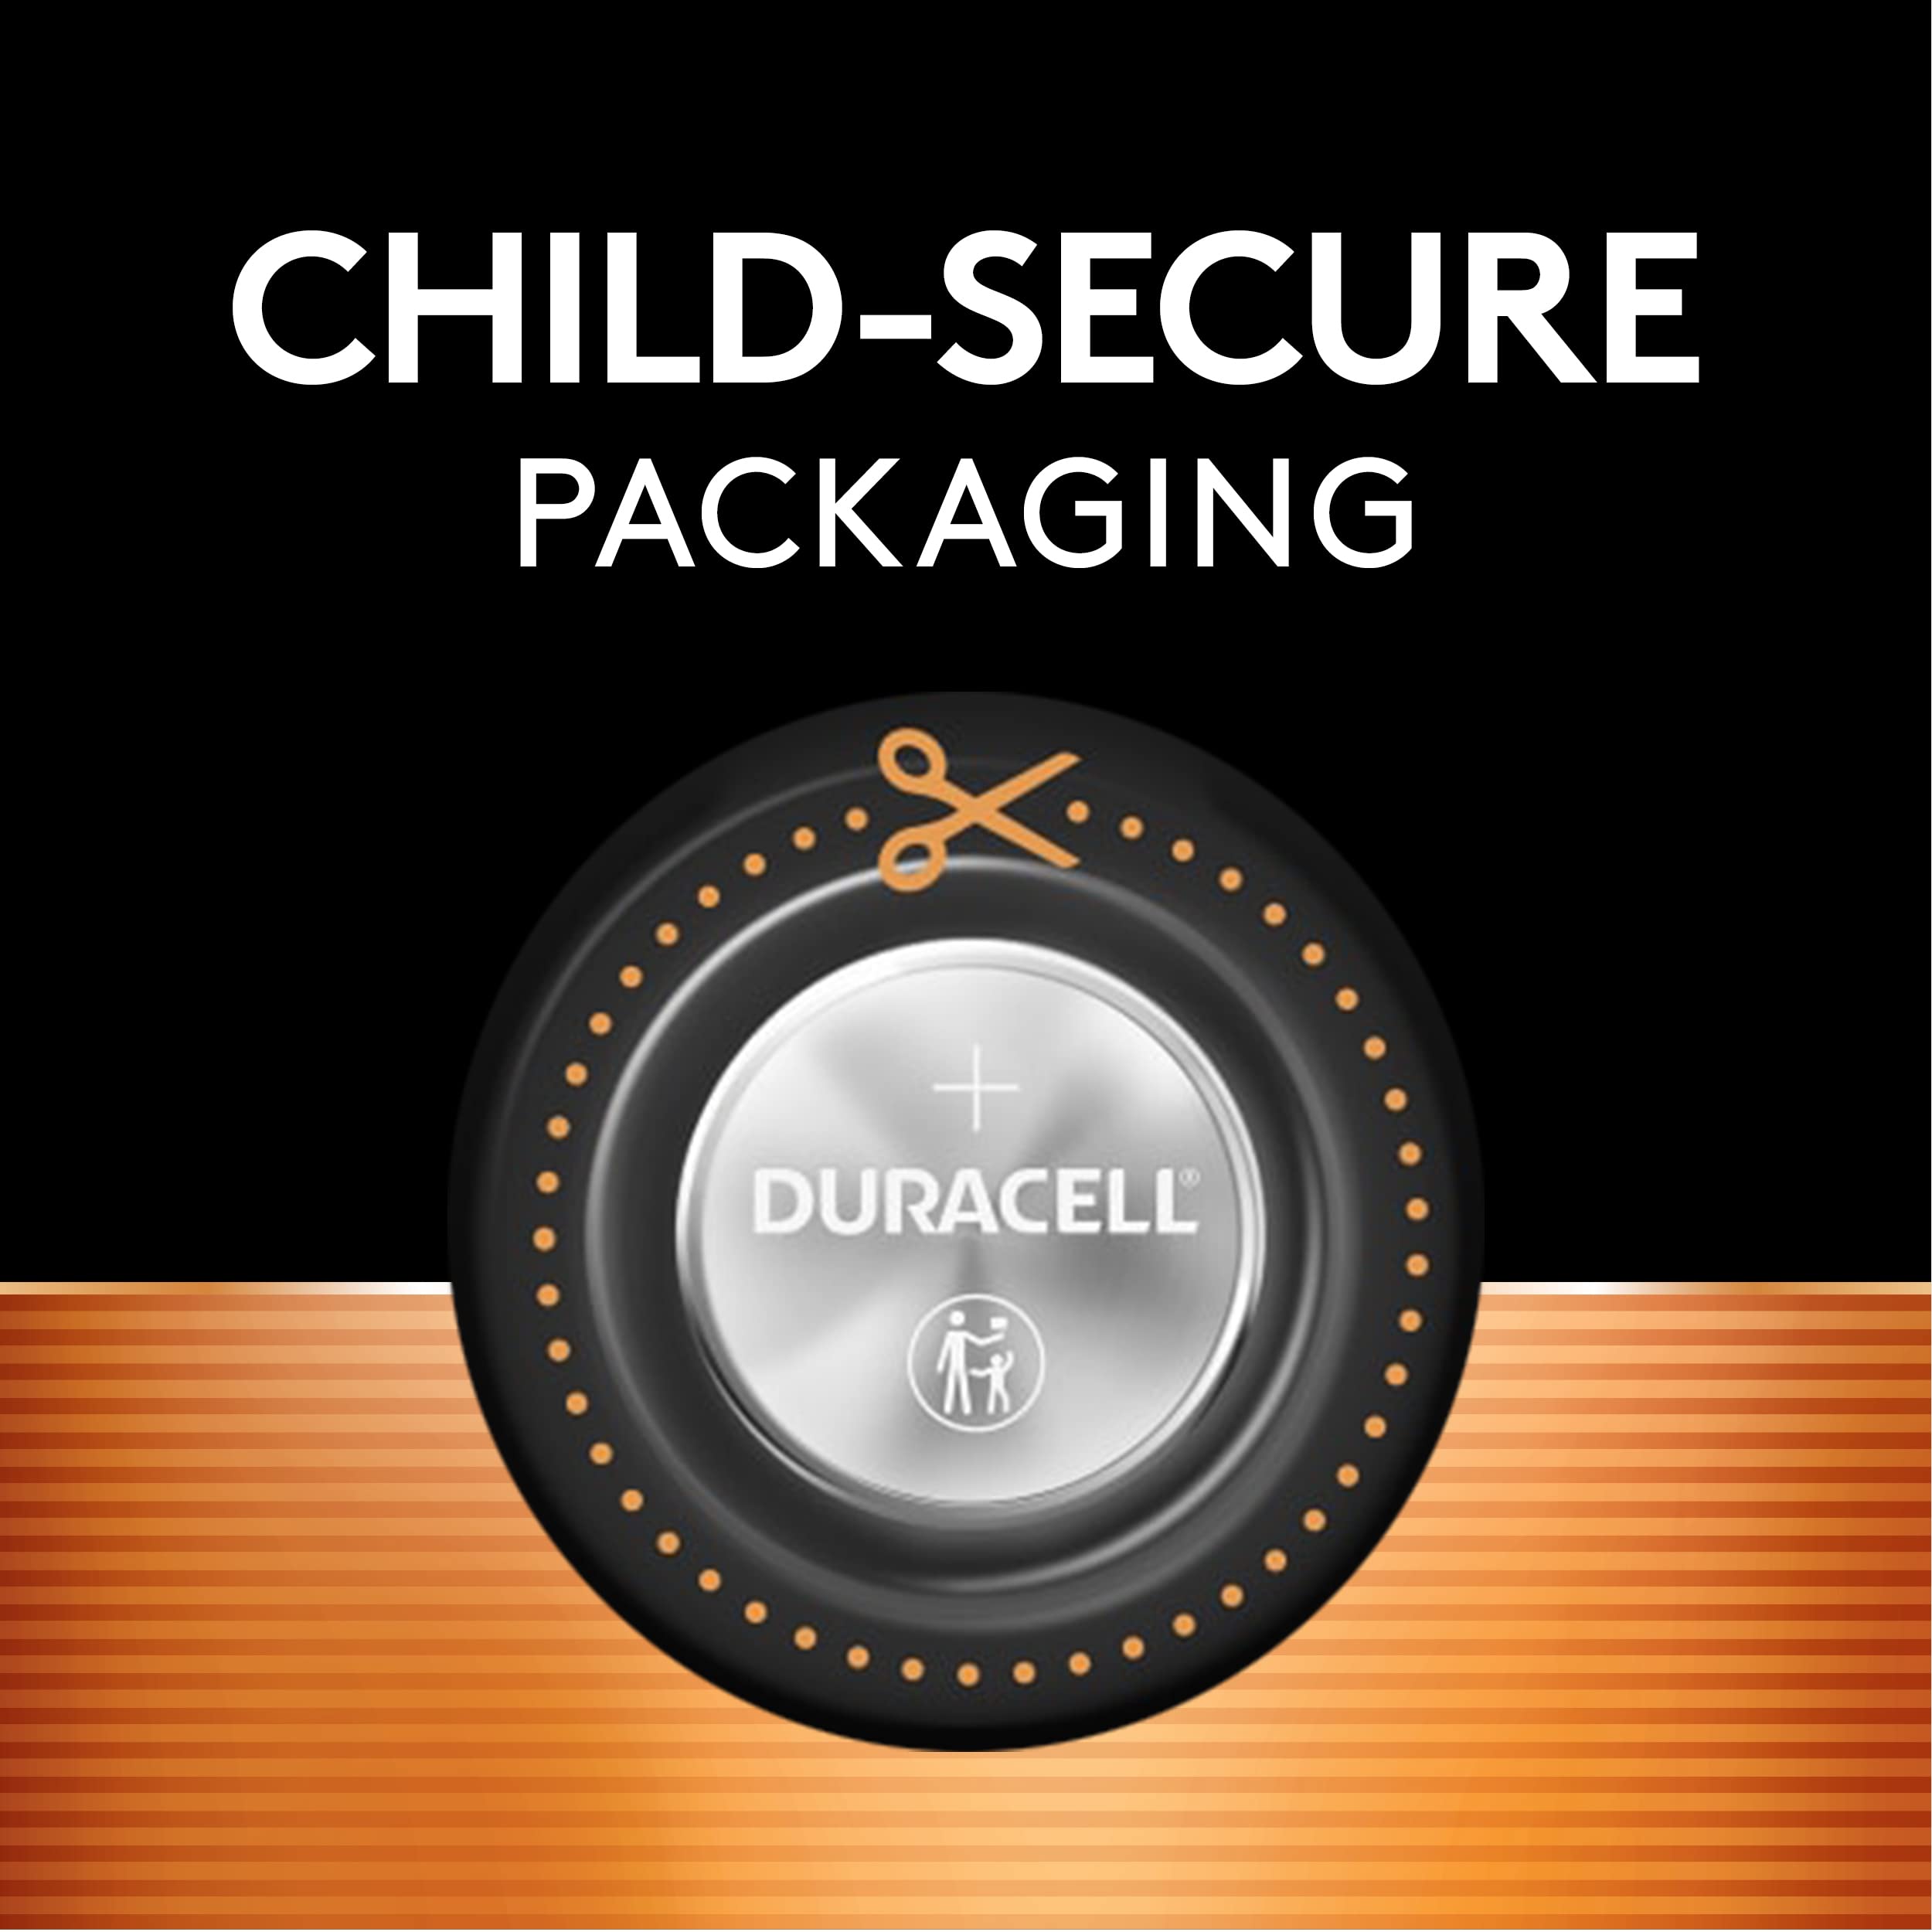 Duracell CR2016 3V Lithium Battery, Child Safety Features, 2 Count Pack, Lithium Coin Battery for Key Fob, Car Remote, Glucose Monitor, CR Lithium 3 Volt Cell